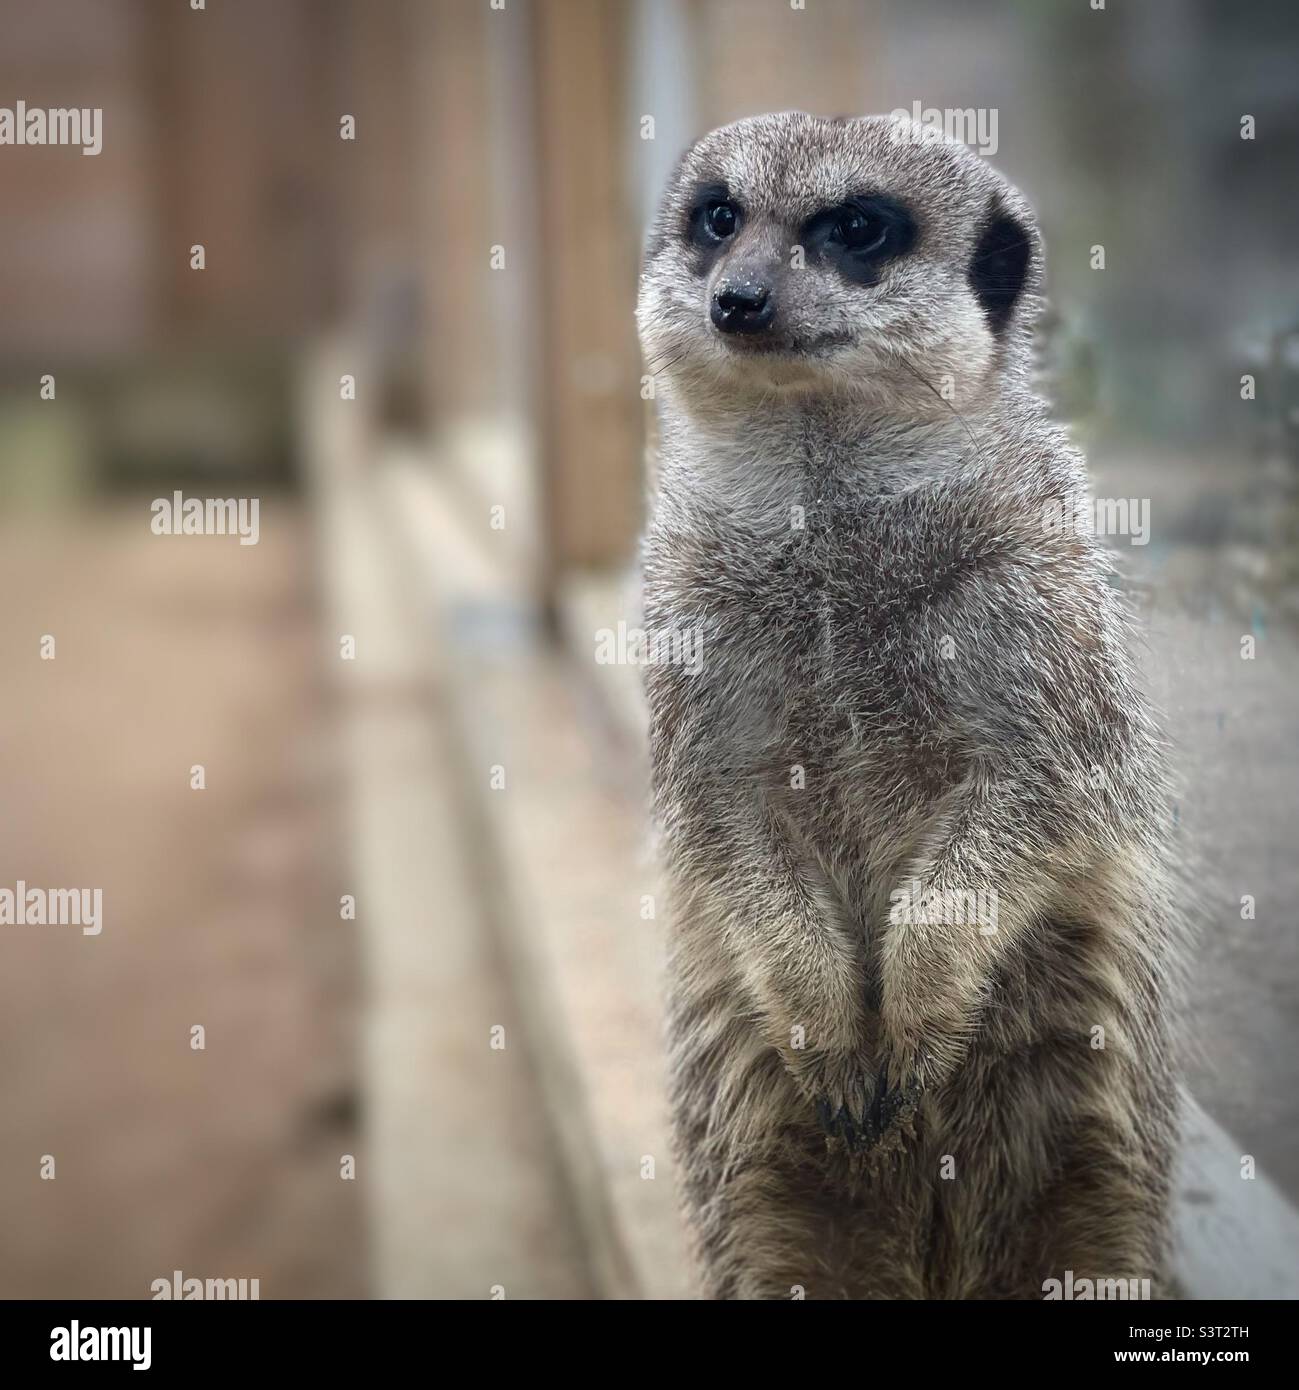 Close up portrait of a meerkat keeping watch. Stock Photo